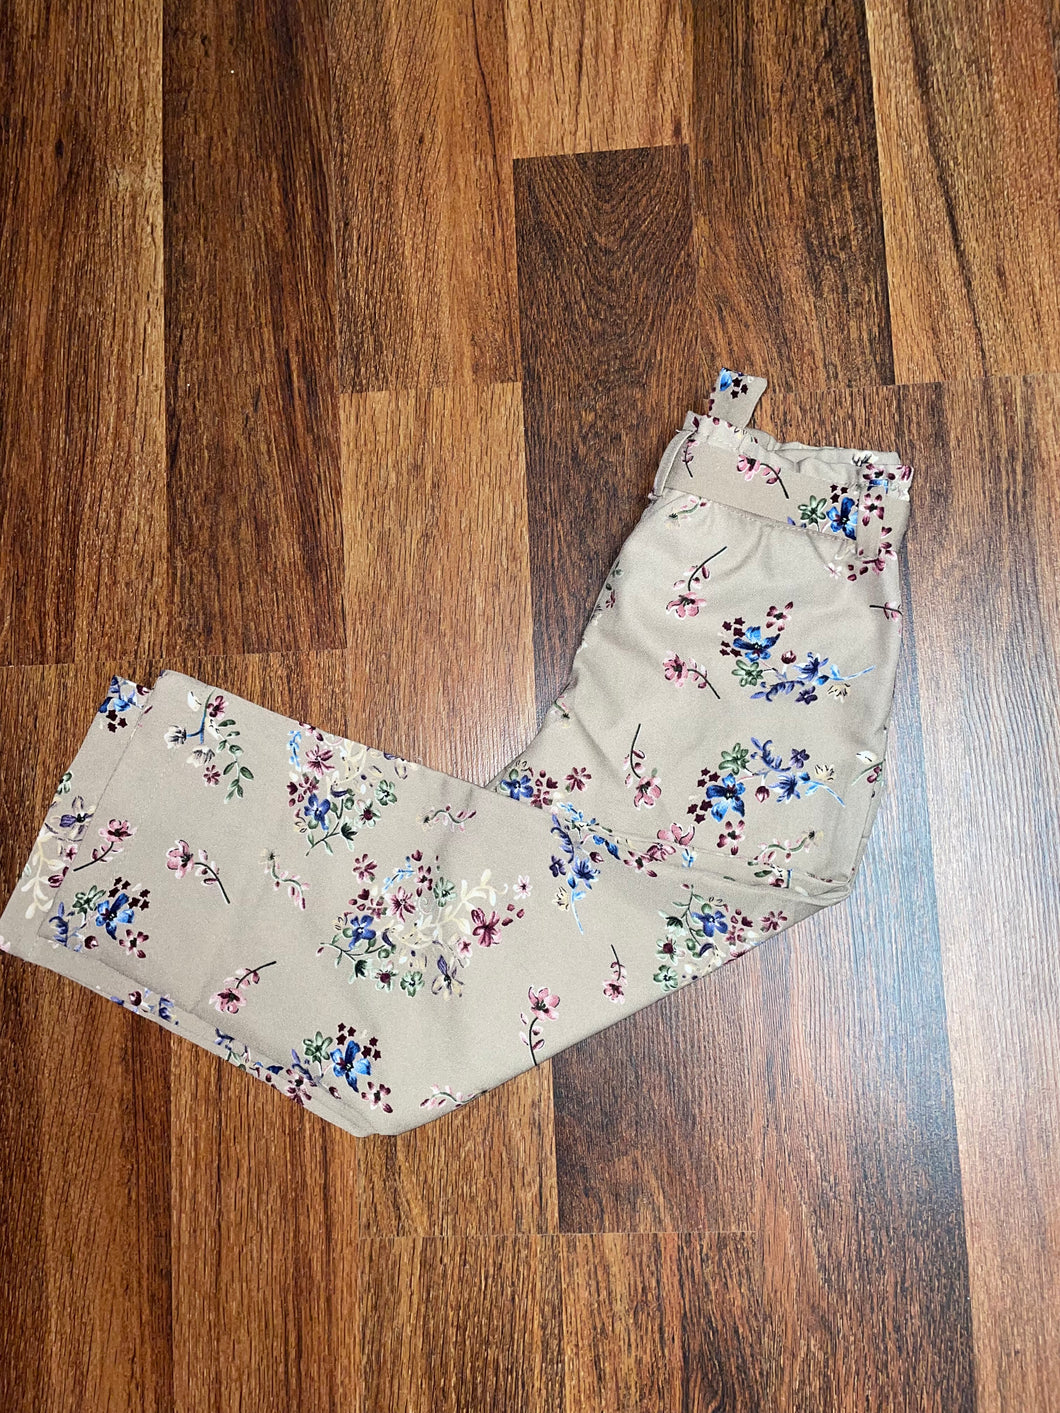 NWT Bailey's Blossoms 4t pants